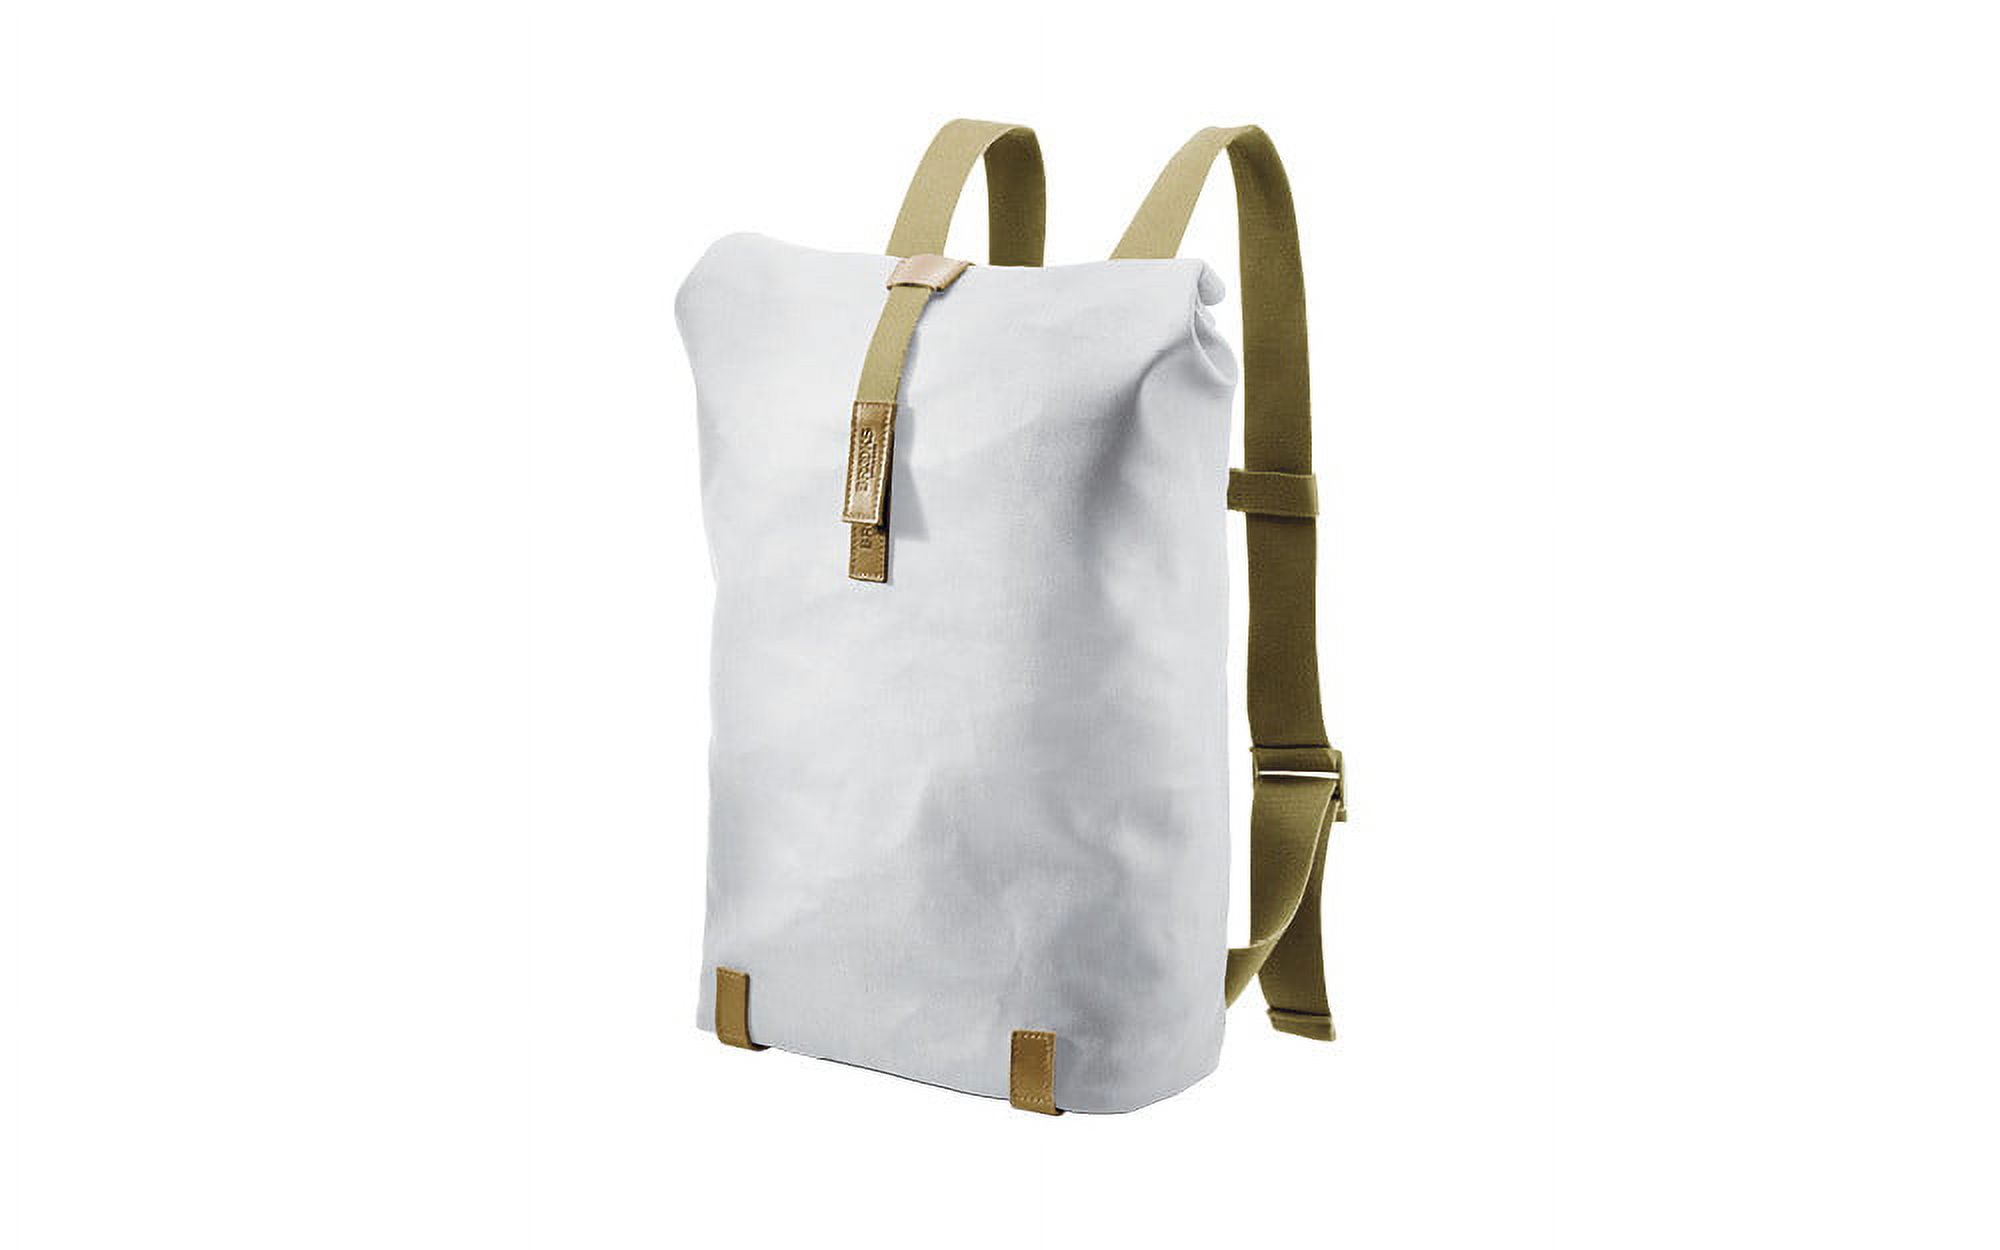 Pickwick Day Pack - (Large / 26 Liter) - White/Stone - image 1 of 3